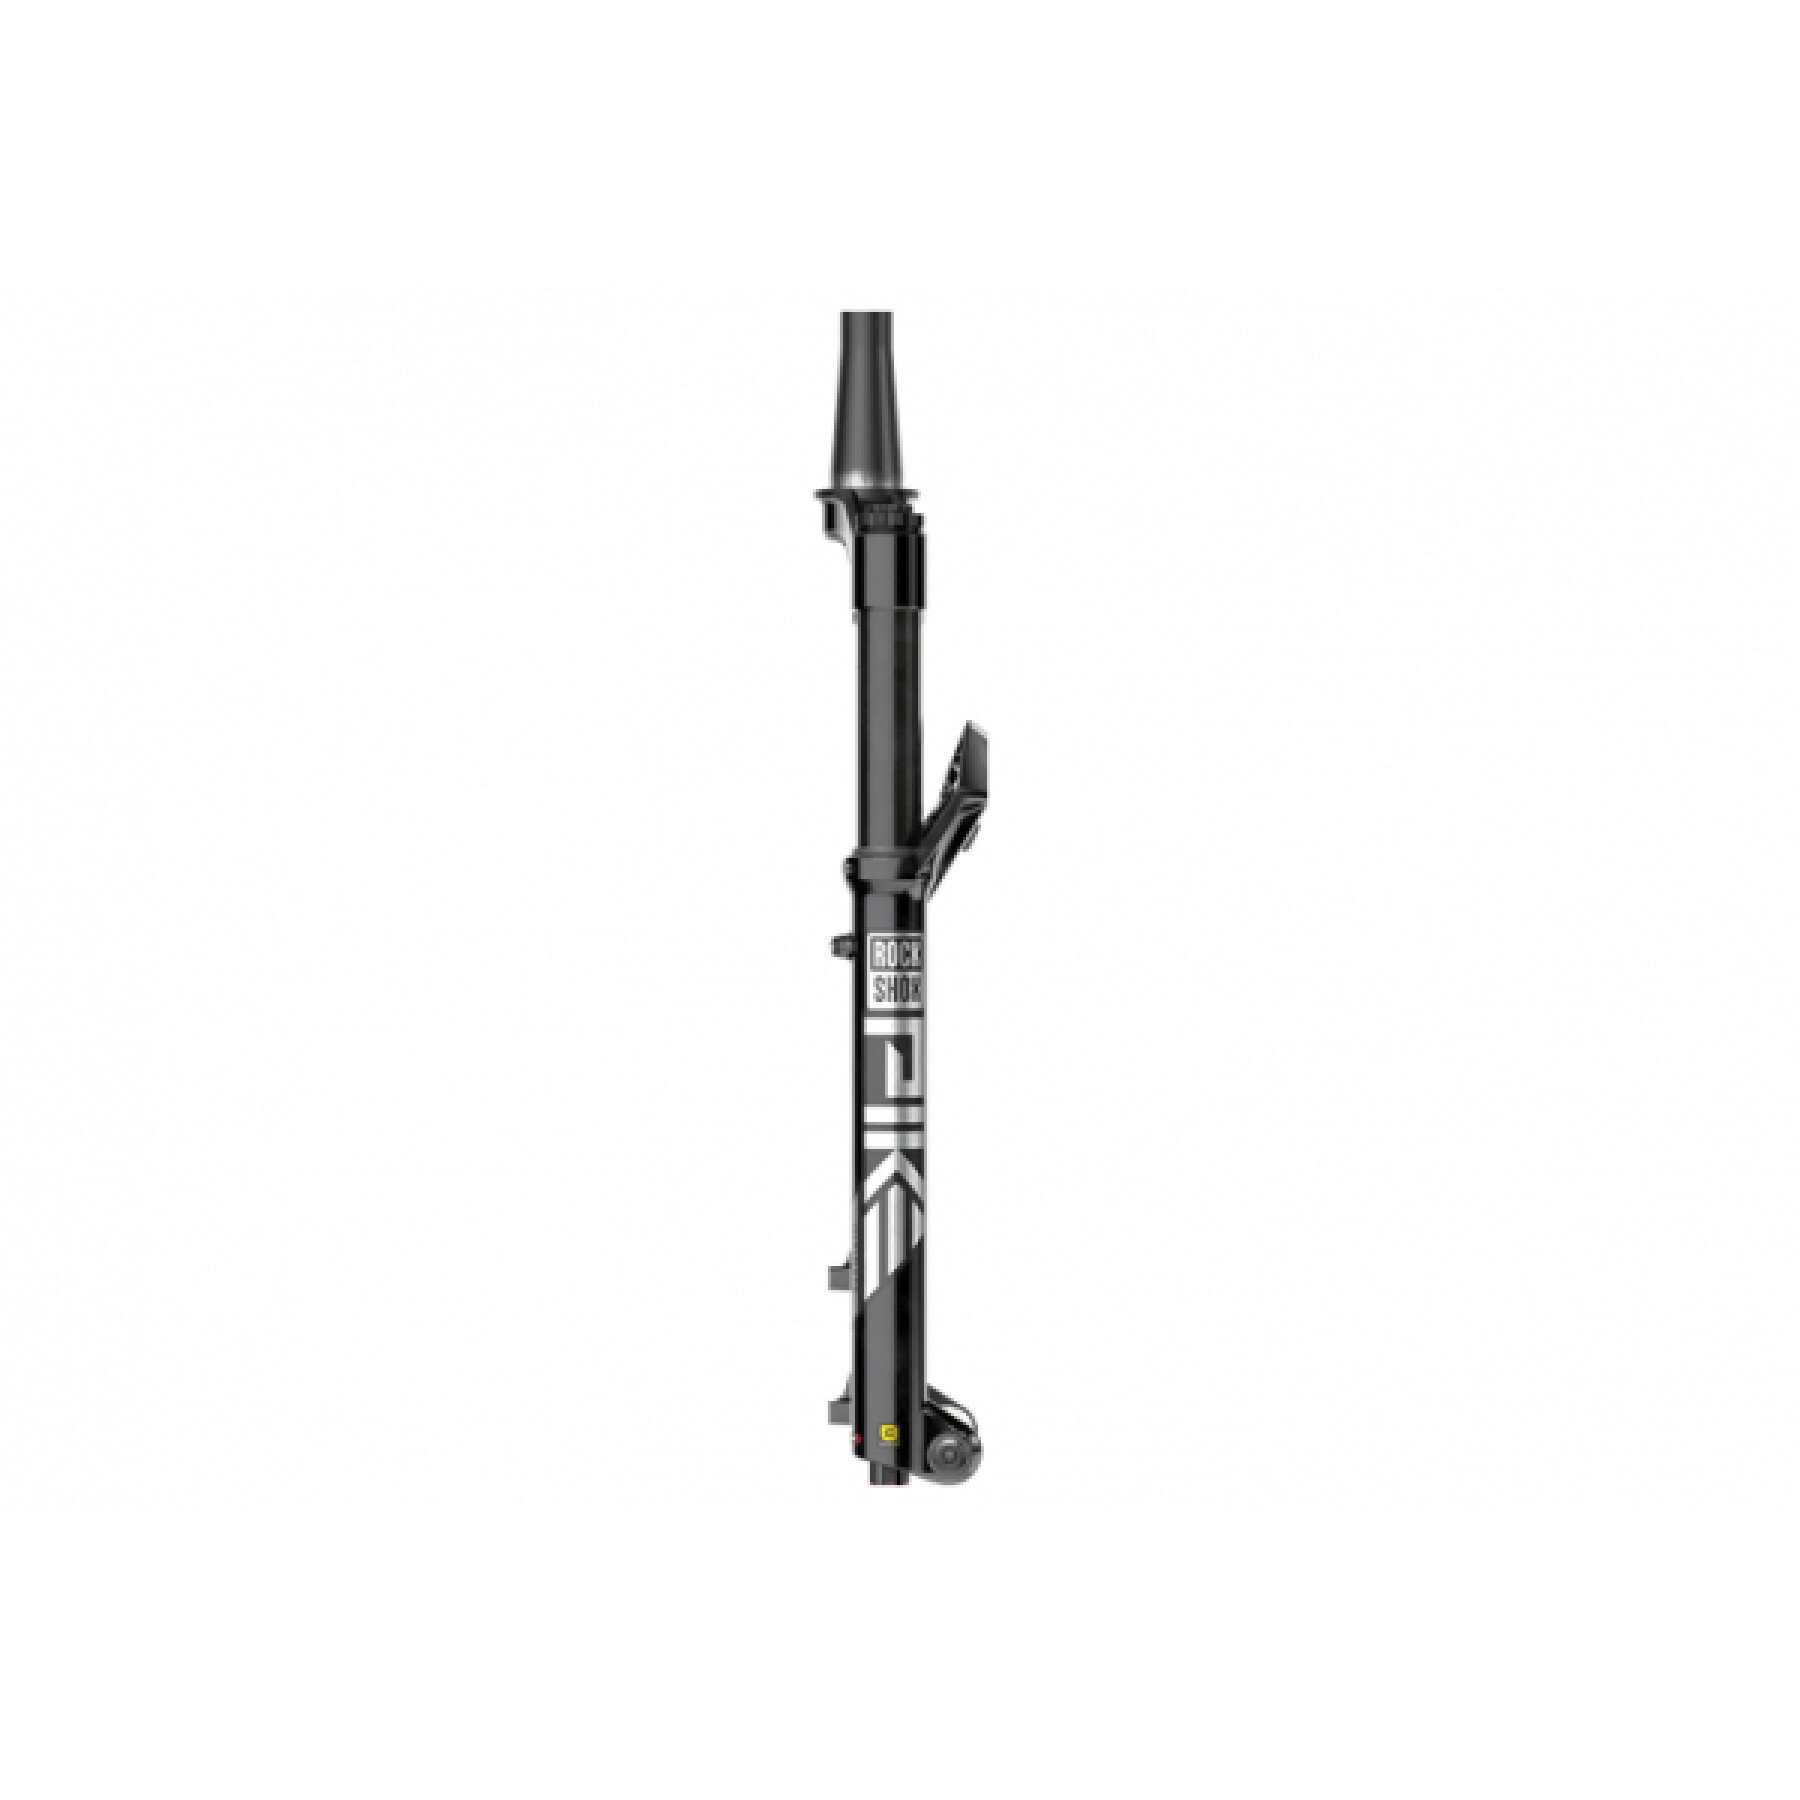 Horquilla Rockshox Pike Ultimate Charger 3 RC2 27.5 OS37 C1